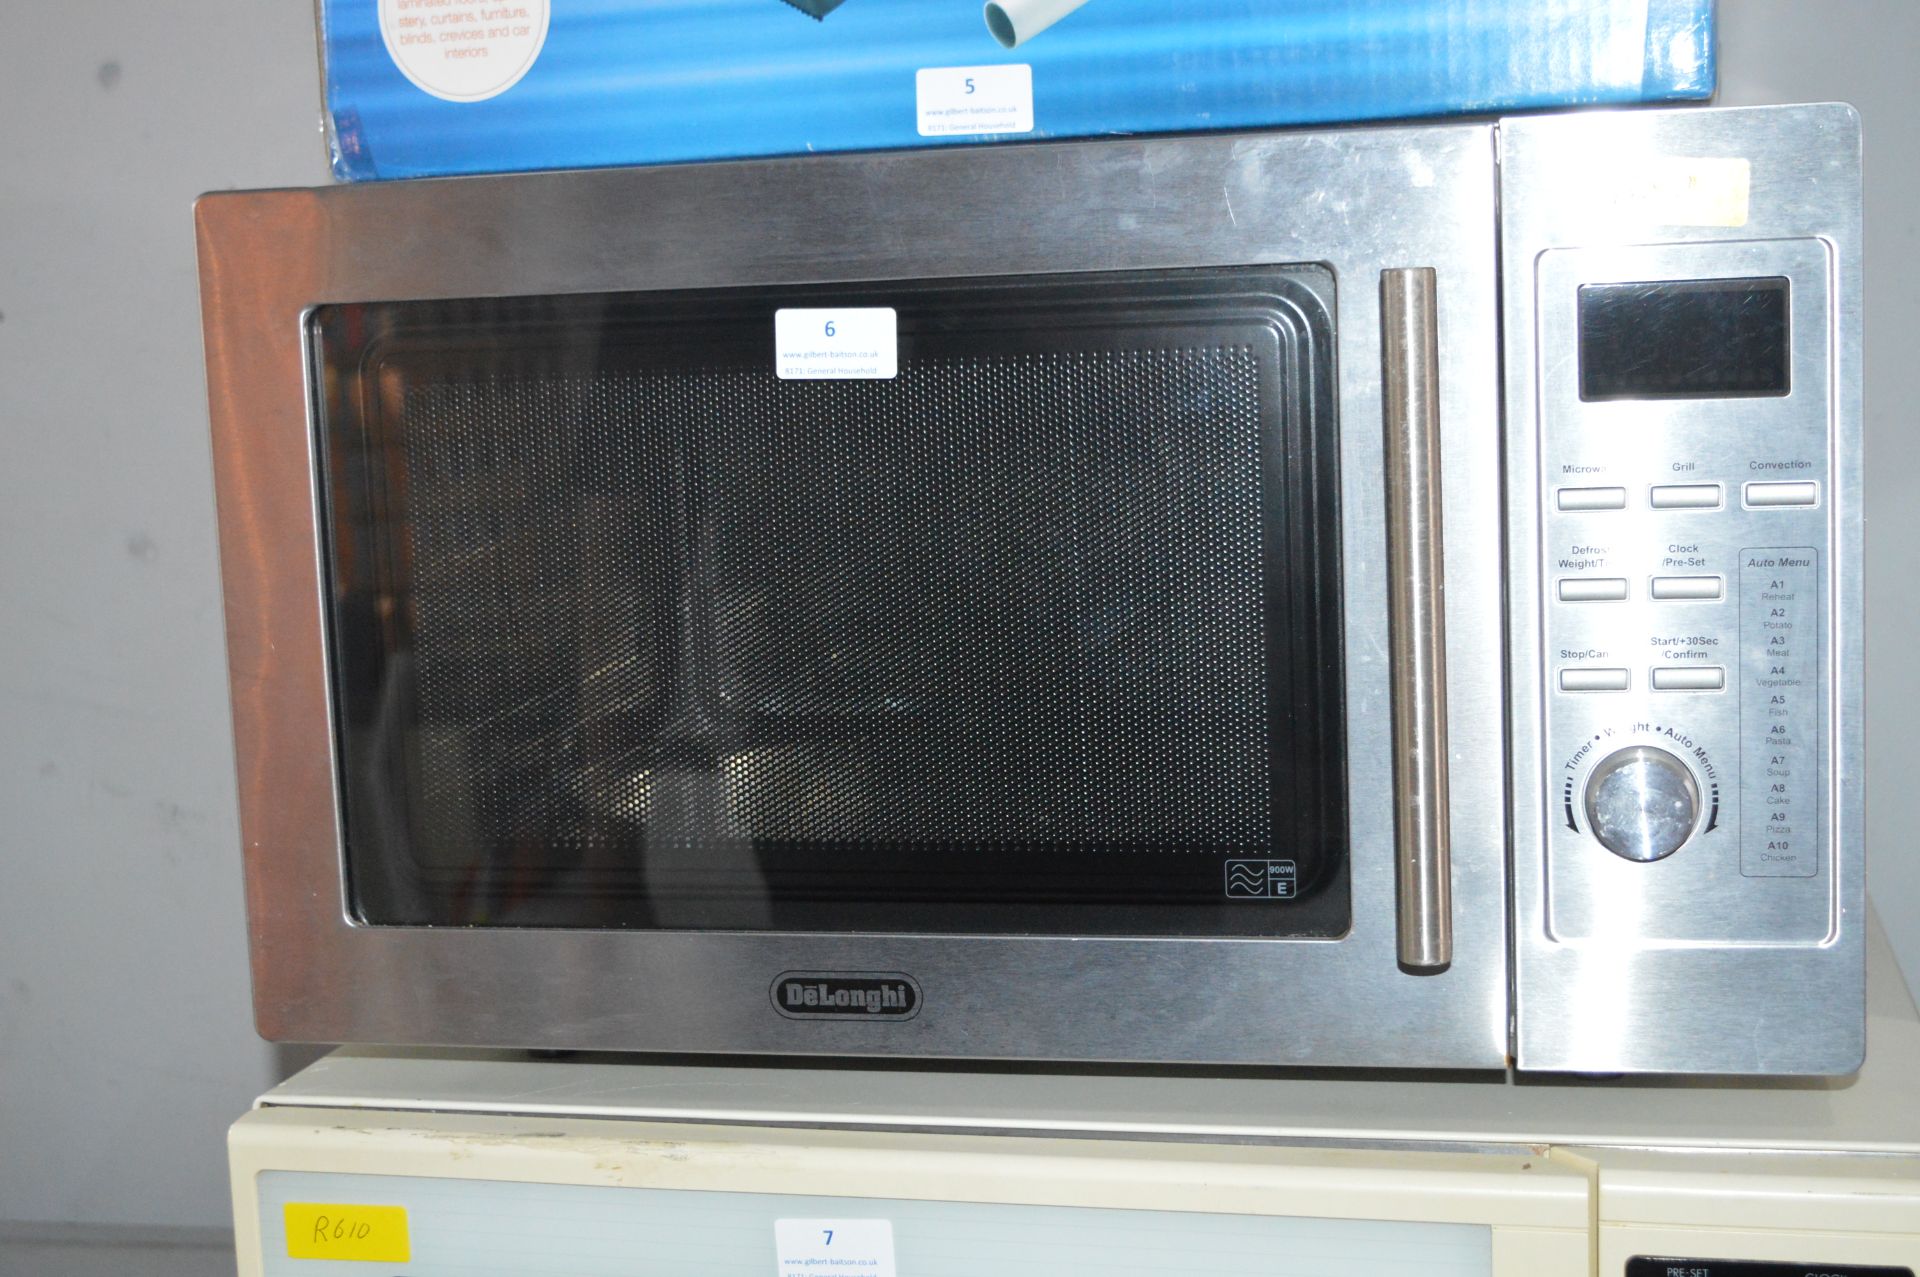 Delonghi Stainless Steel Microwave Oven